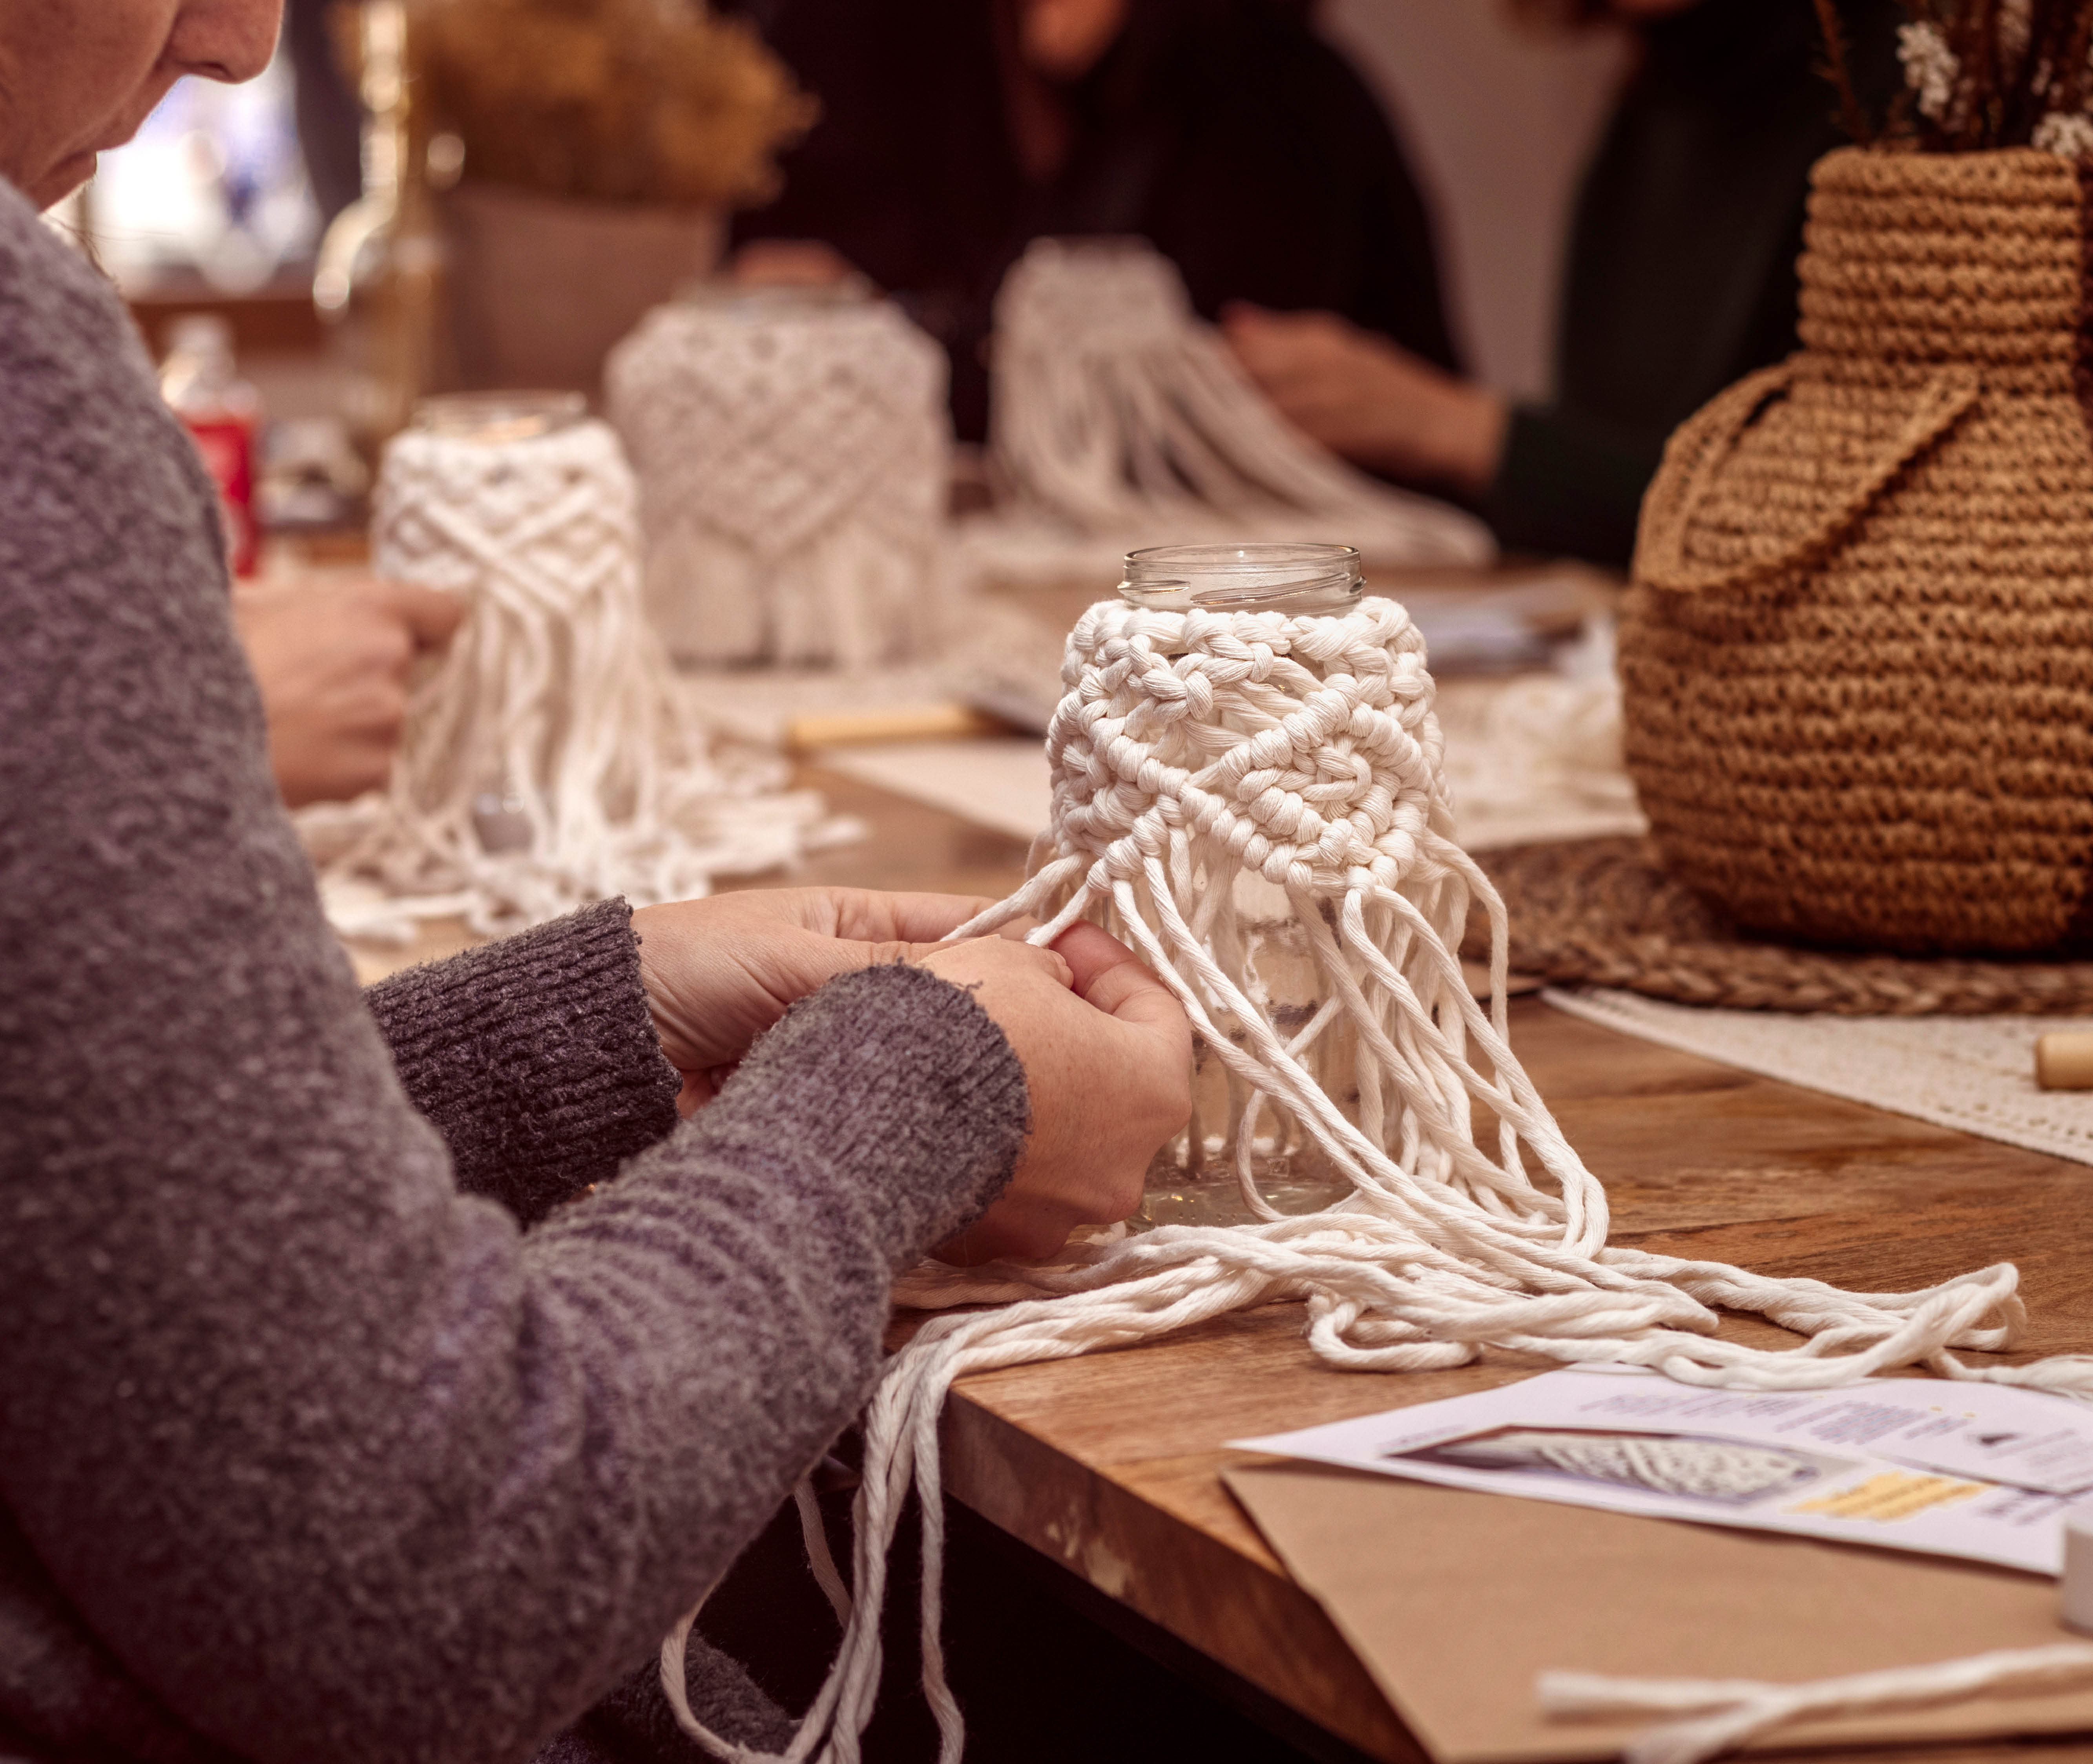 Master the art of macrame by joining us for a hands-on workshop, where you will discover the 1970s textile knotting technique that is making a resurgence.